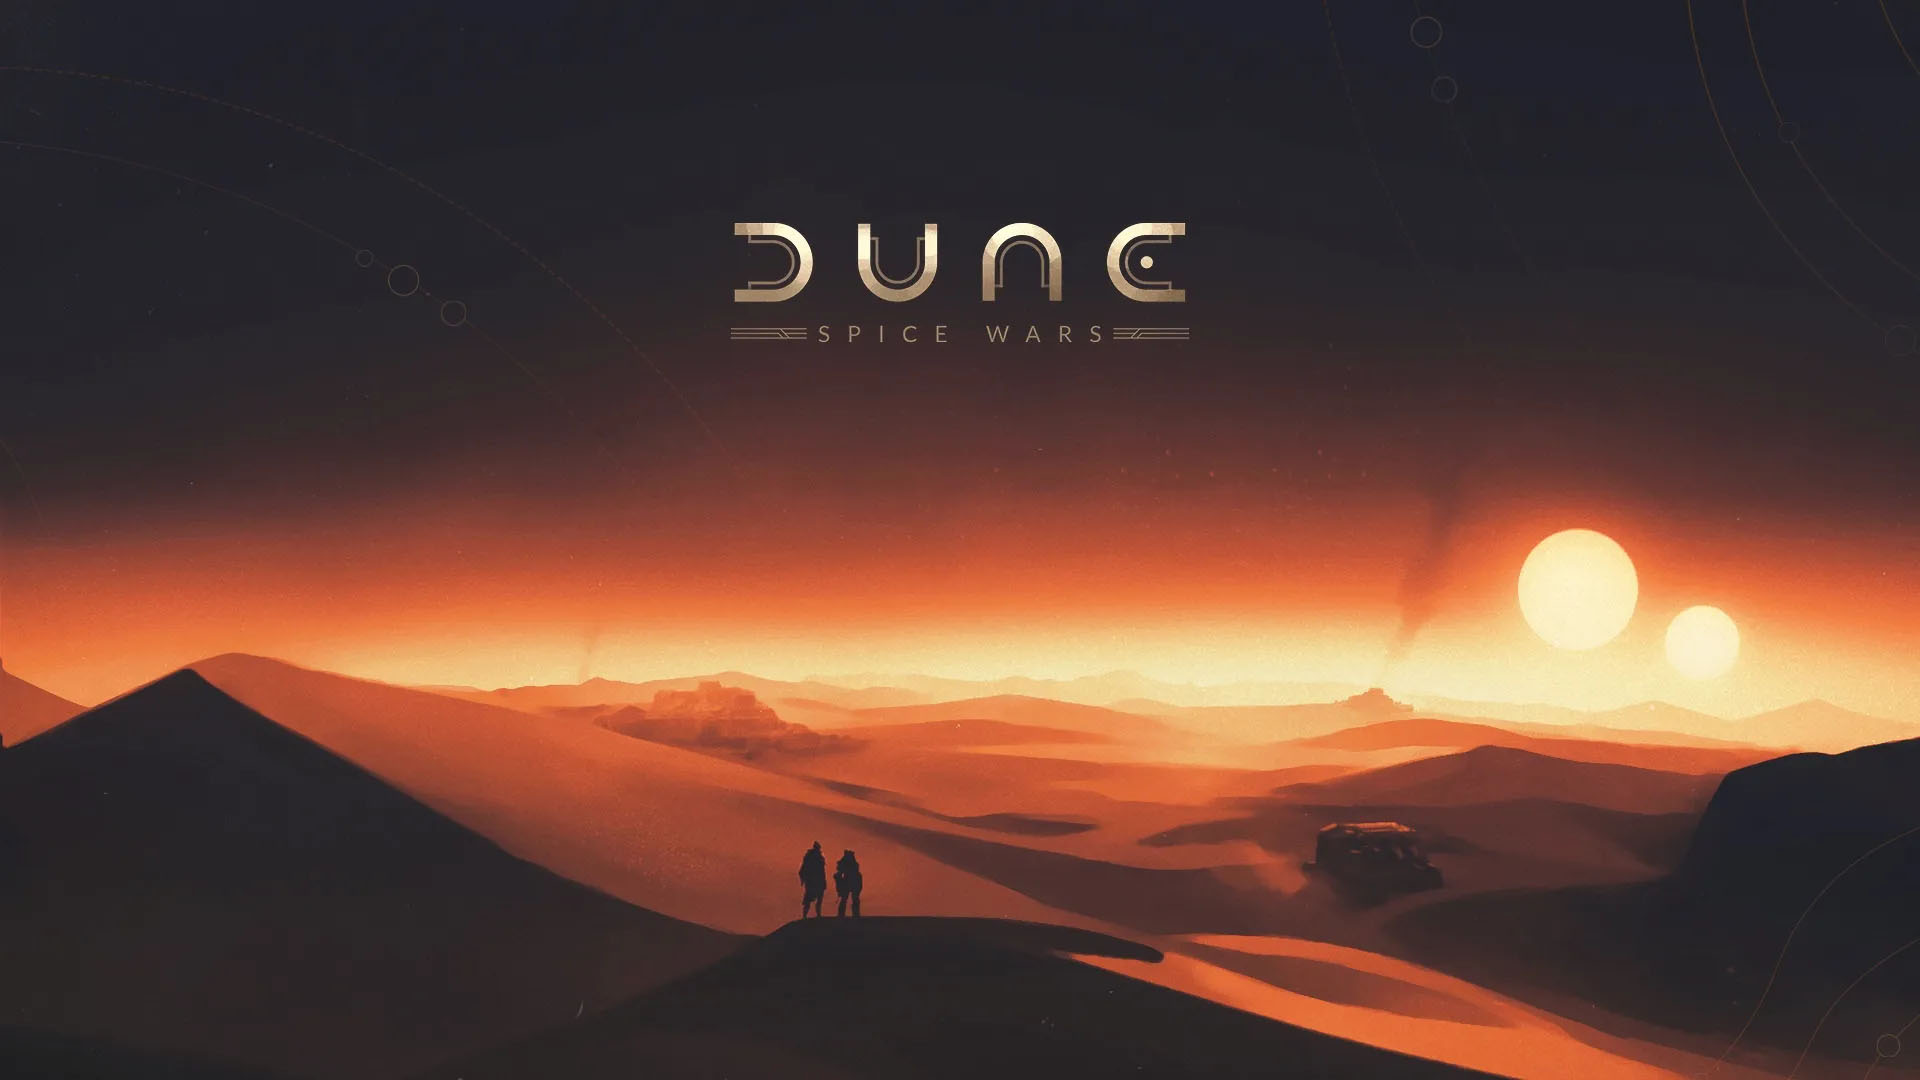 PC Game Pass is adding Dune: Spice Wars